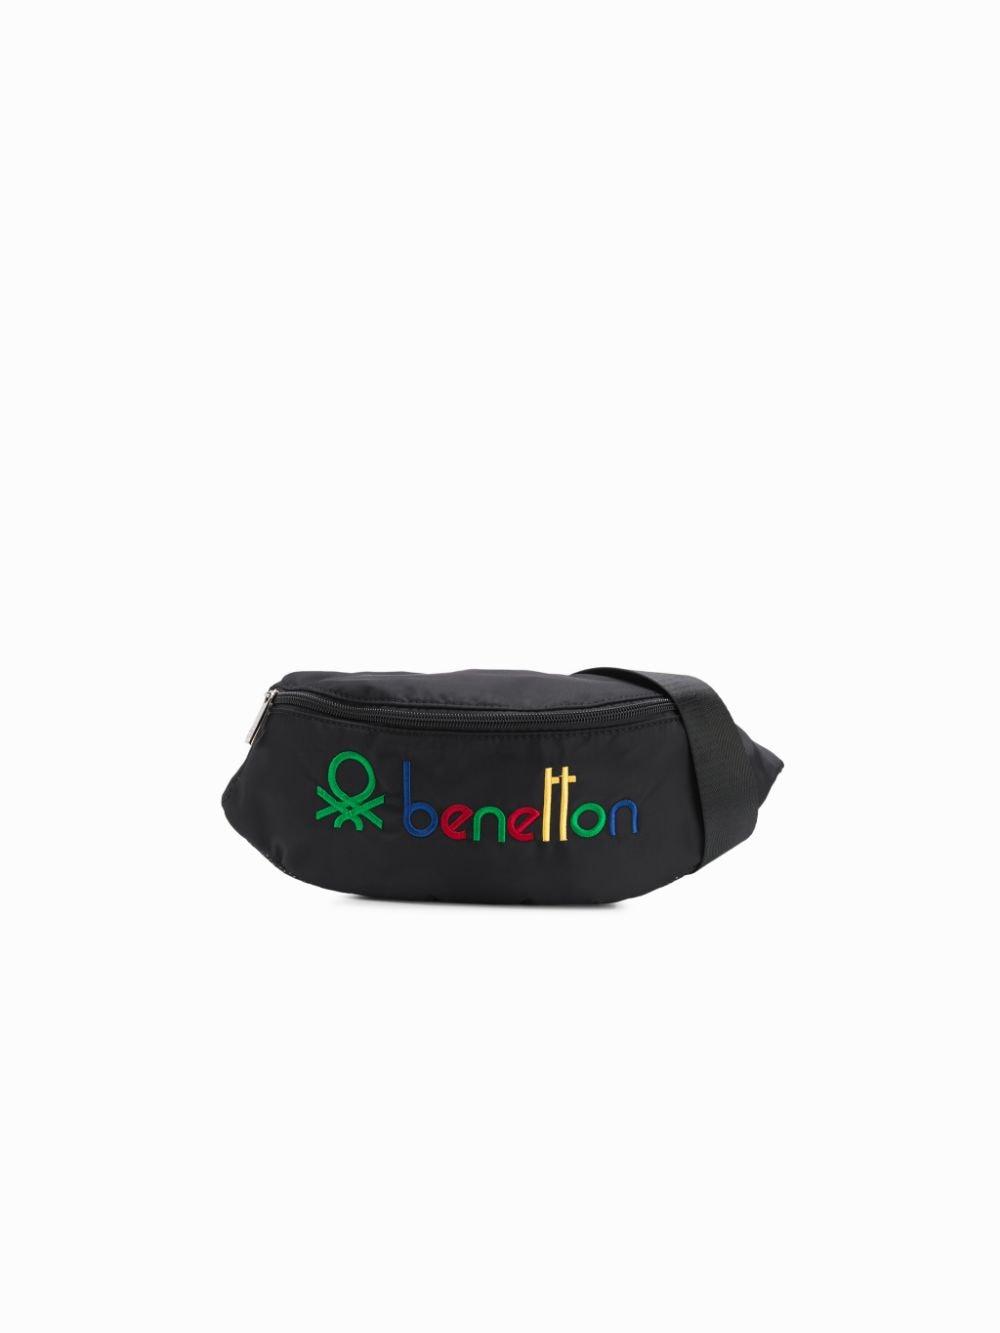 United Colors Of Benetton Vinyl Shoulder Bag With Colorful